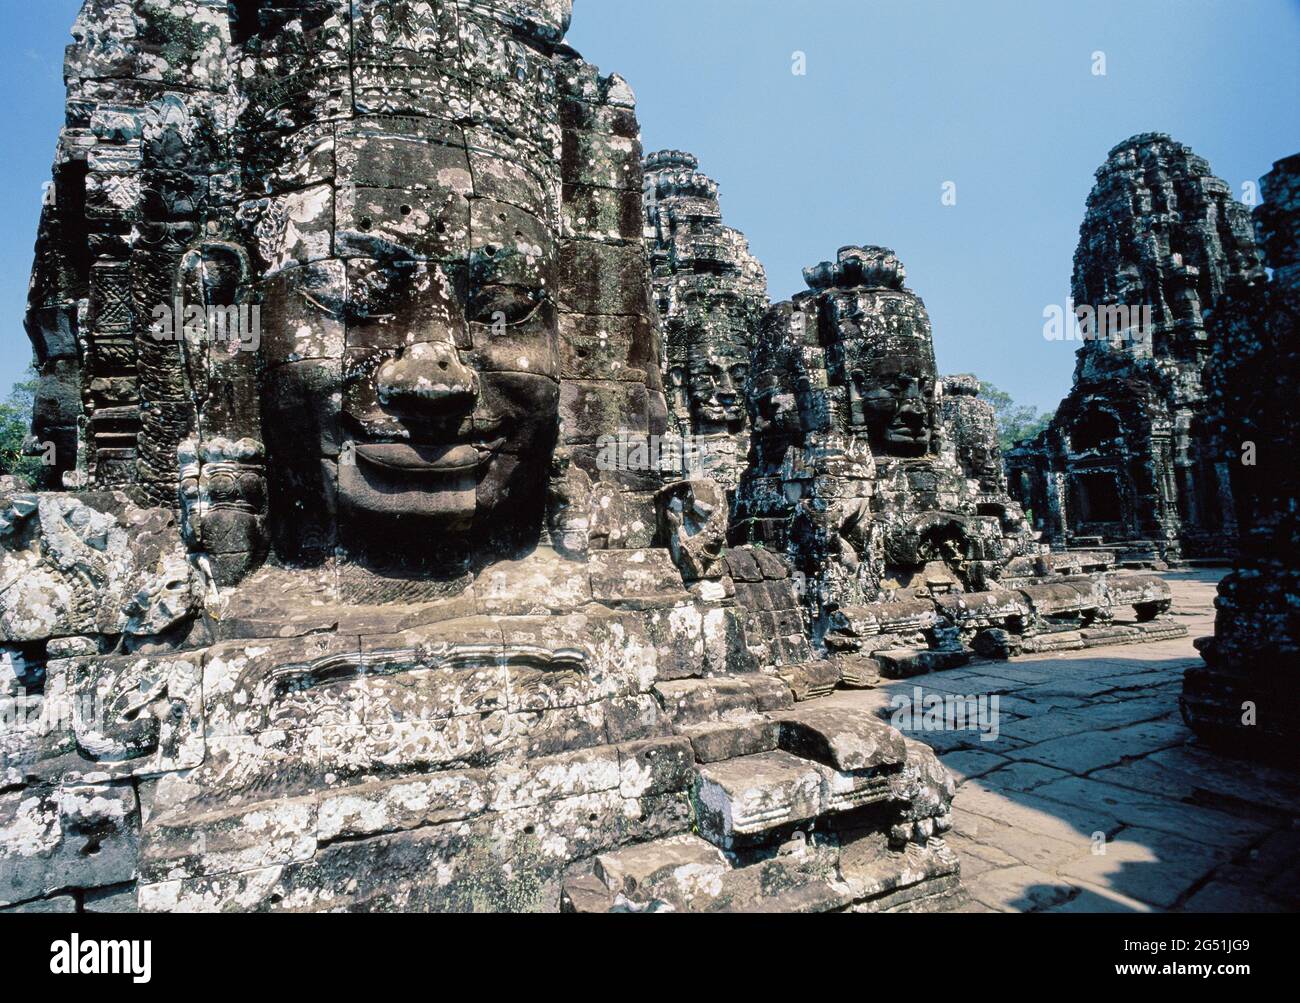 Sculptures and ancient architecture, Bayon Temple, Angkor Thom, Siem Reap, Cambodia Stock Photo